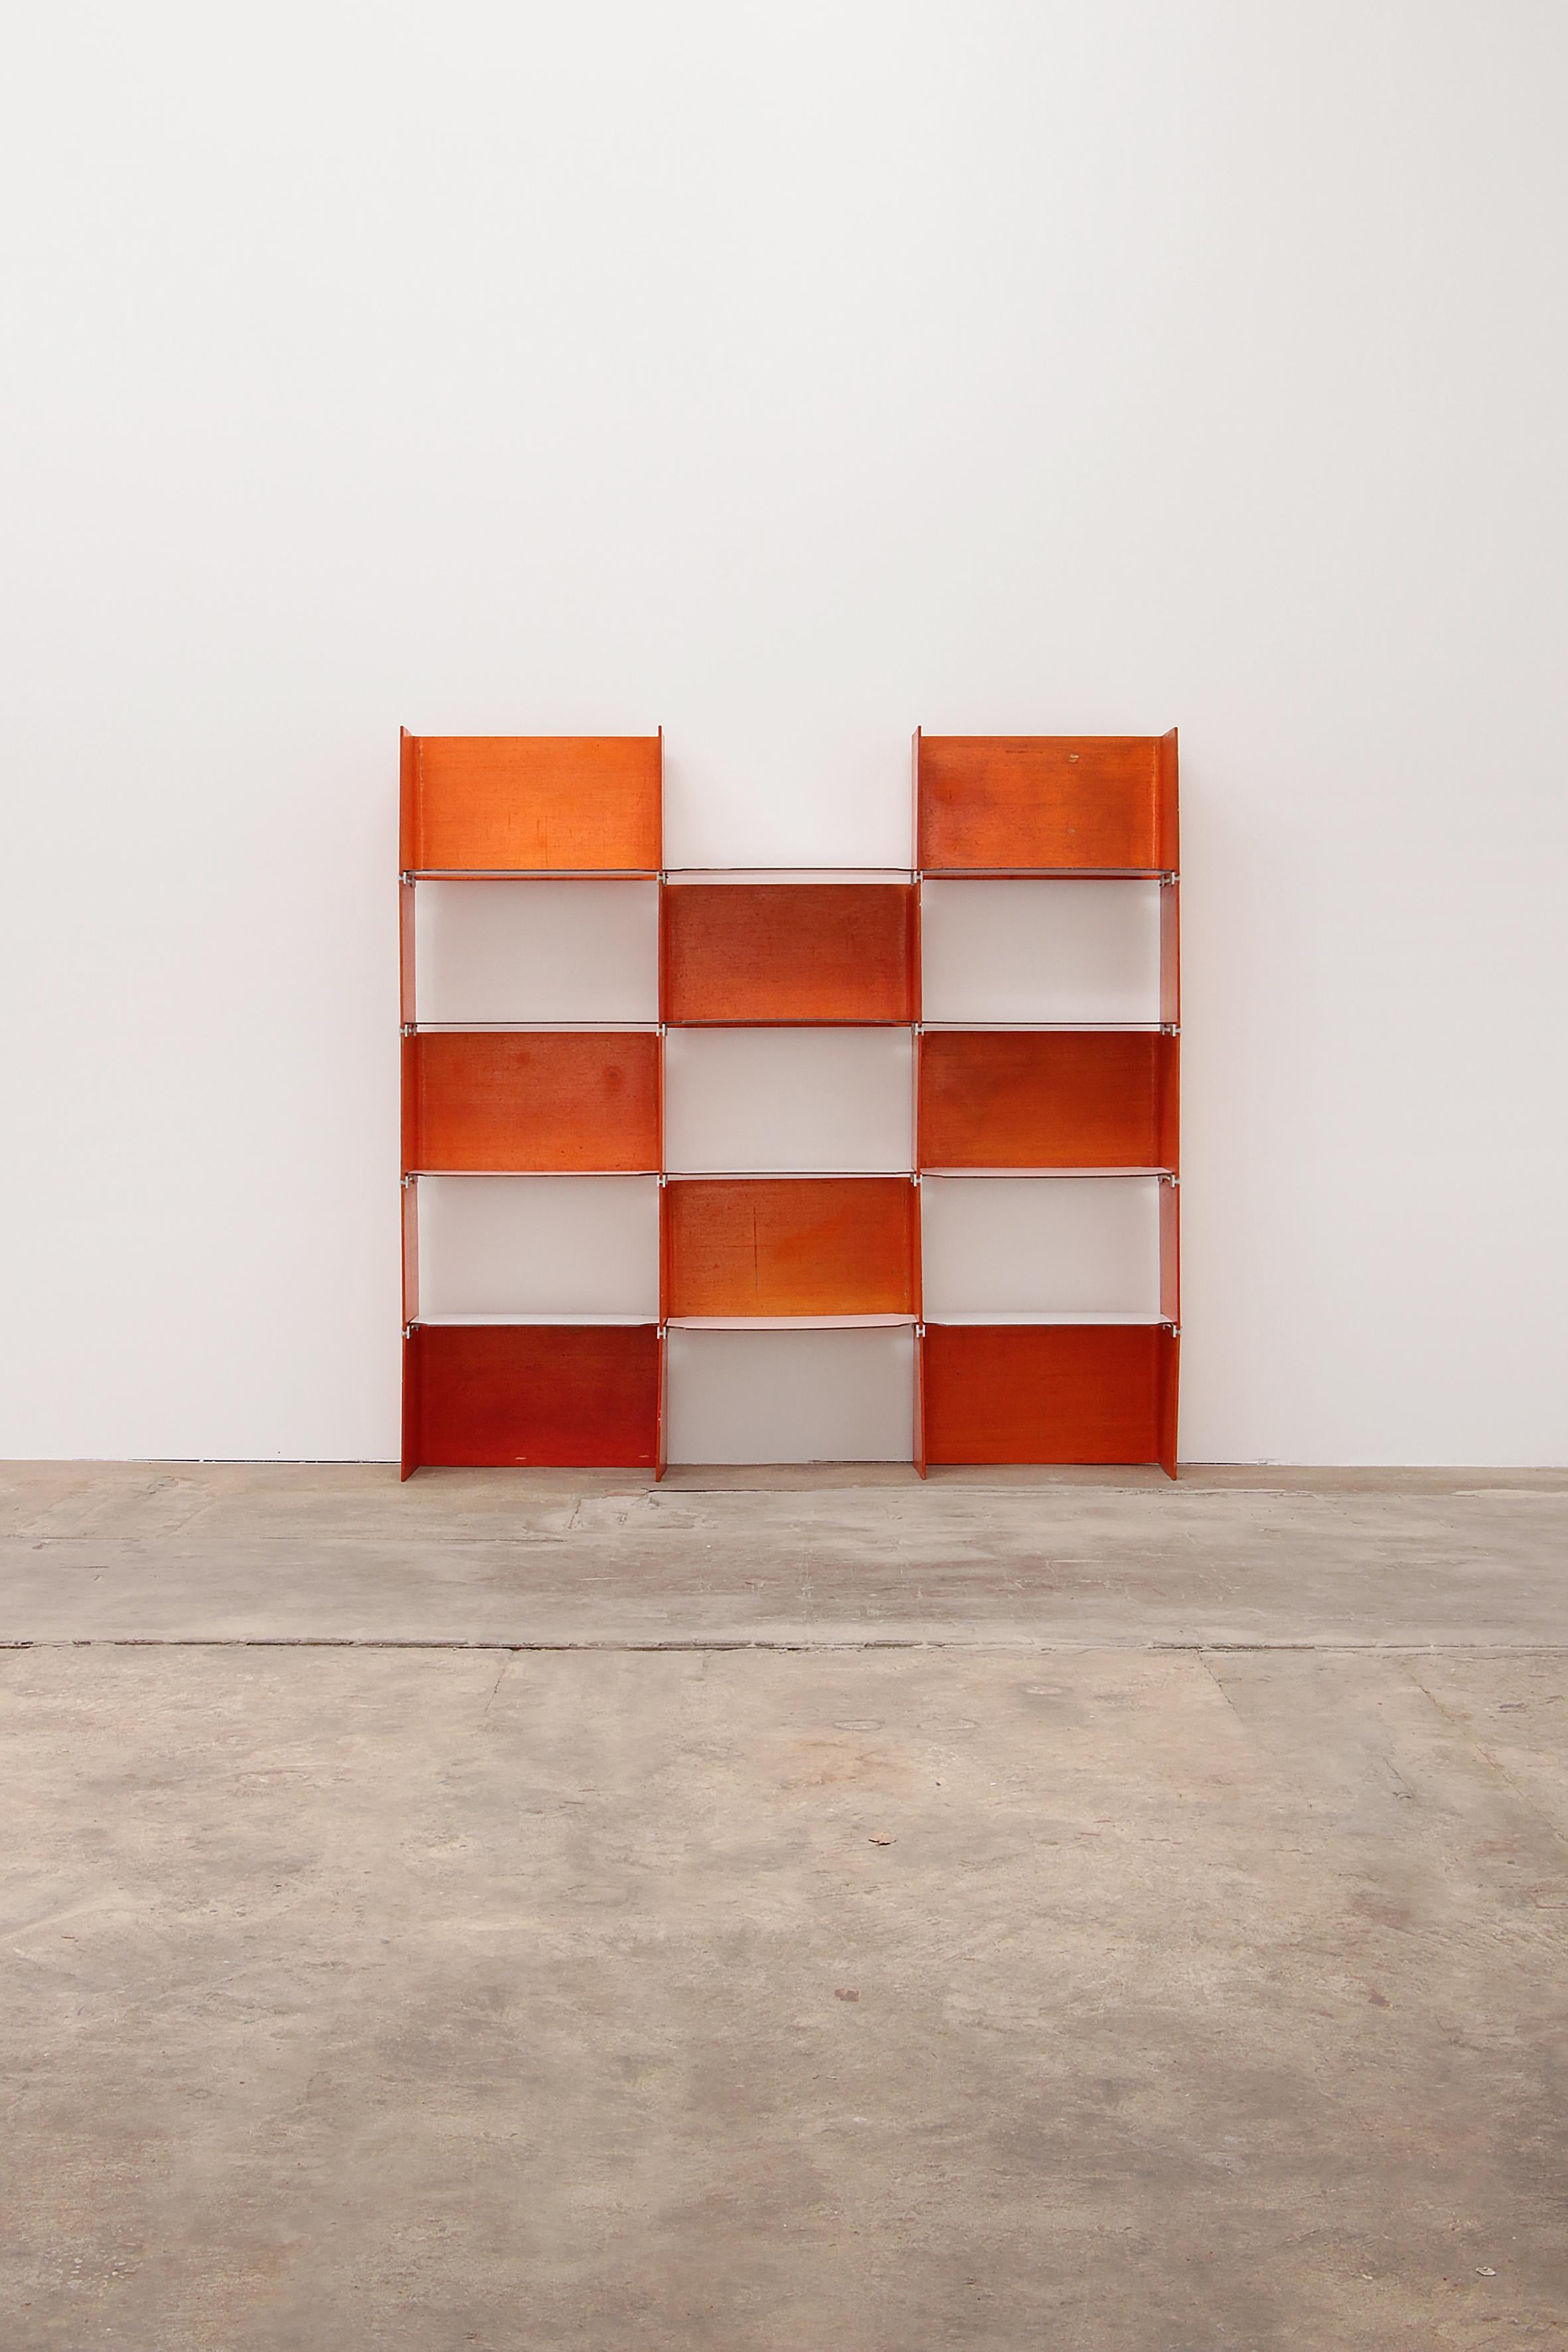 This is a French wall system orange in color and made of multiplex wood.

The freestanding flexible modular shelving system is built in plywood, reminiscent of the great French designer Jean Royere, France 1960. The system consists of connecting